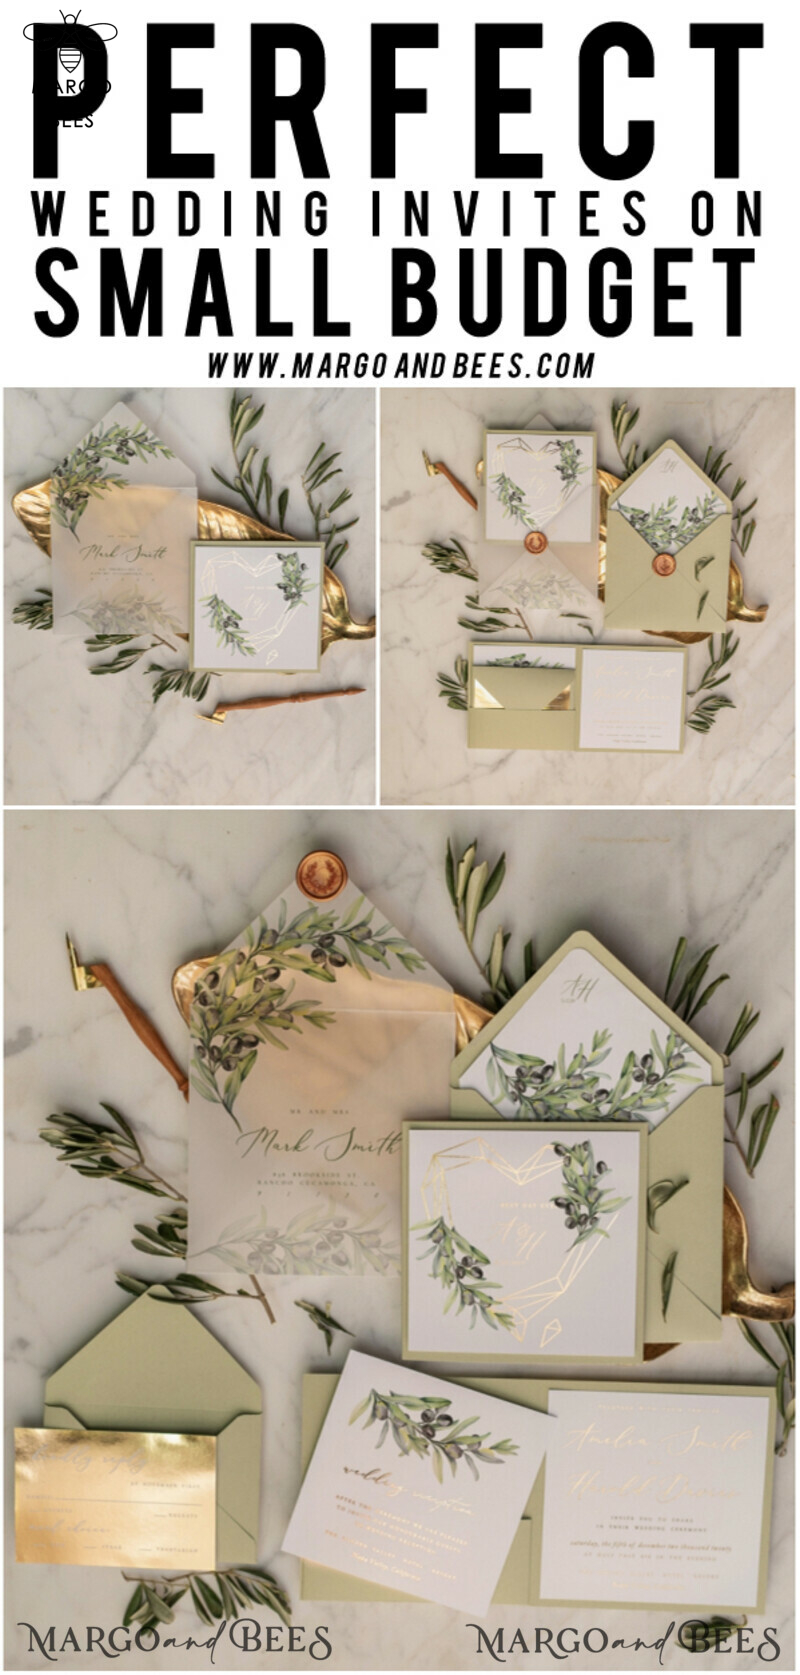 Stunning Olive Wedding Invitations: Luxury Sage Green and Glamour Golden Pocketfold Cards in a Bespoke Tuscany Invitation Suite-11